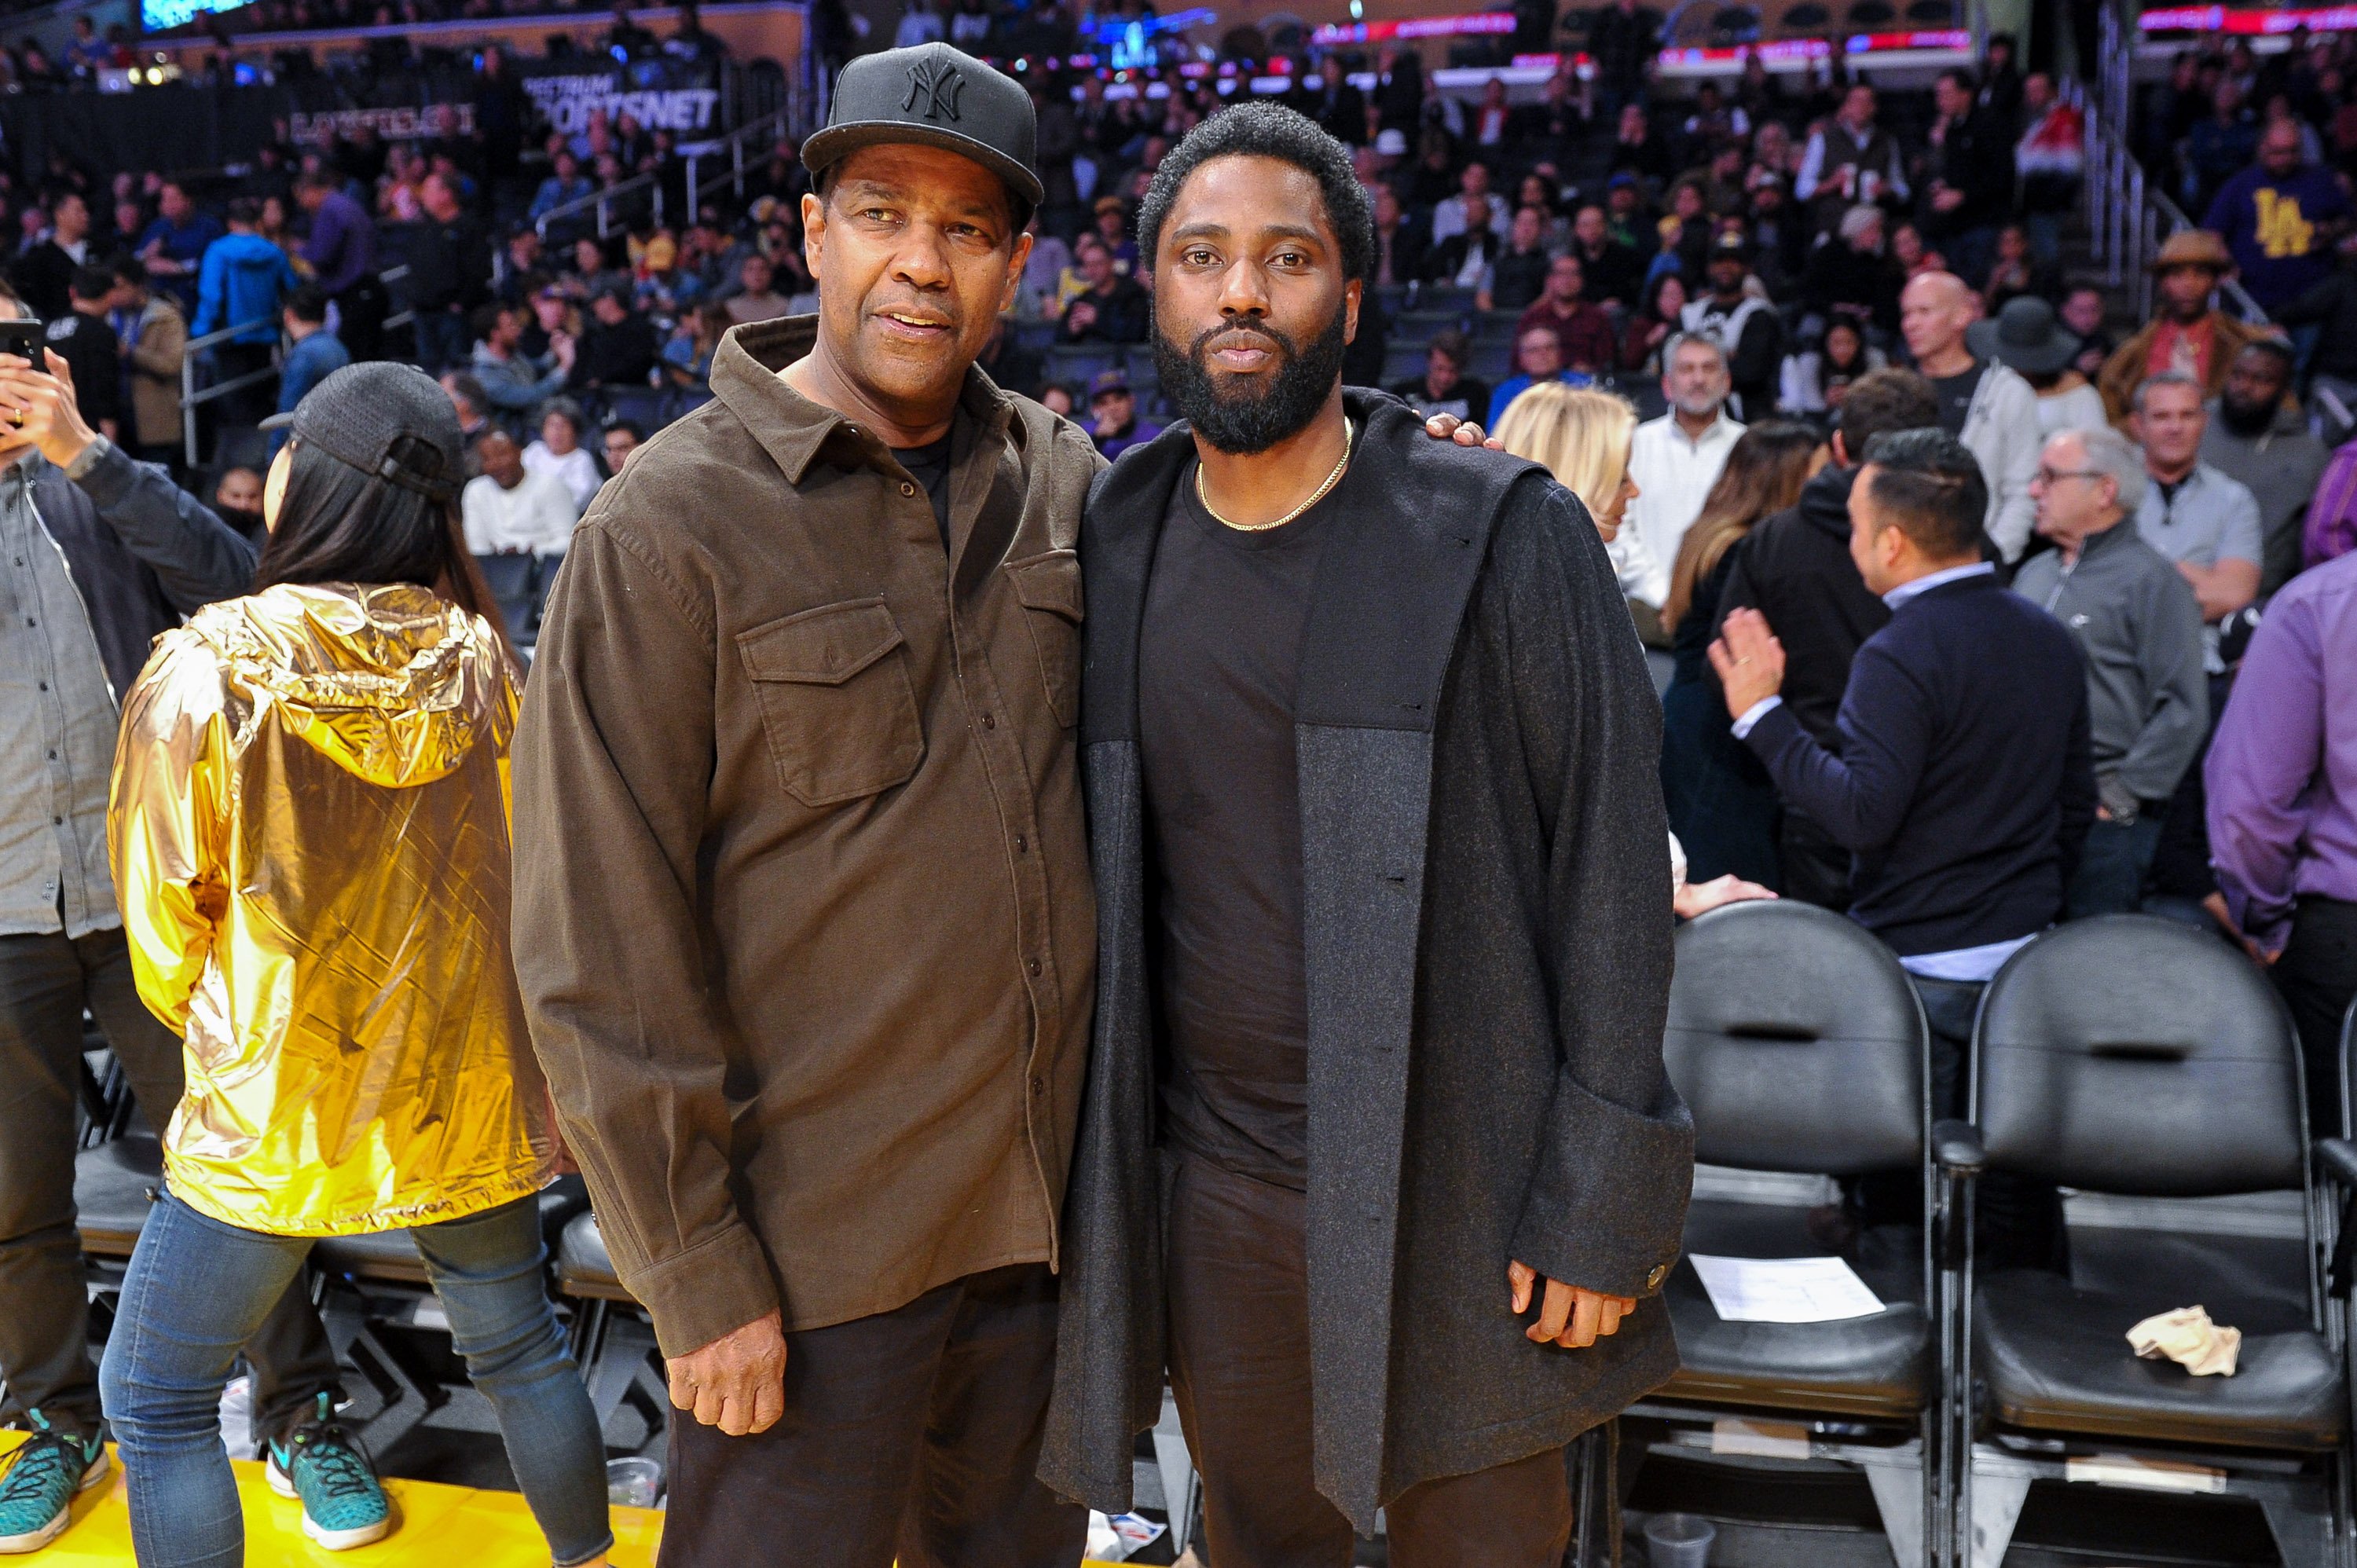 Actors Denzel Washington and son John David Washington attend a basketball game at Staples Center on December 5, 2018 in Los Angeles, California ┃Source: Getty Images